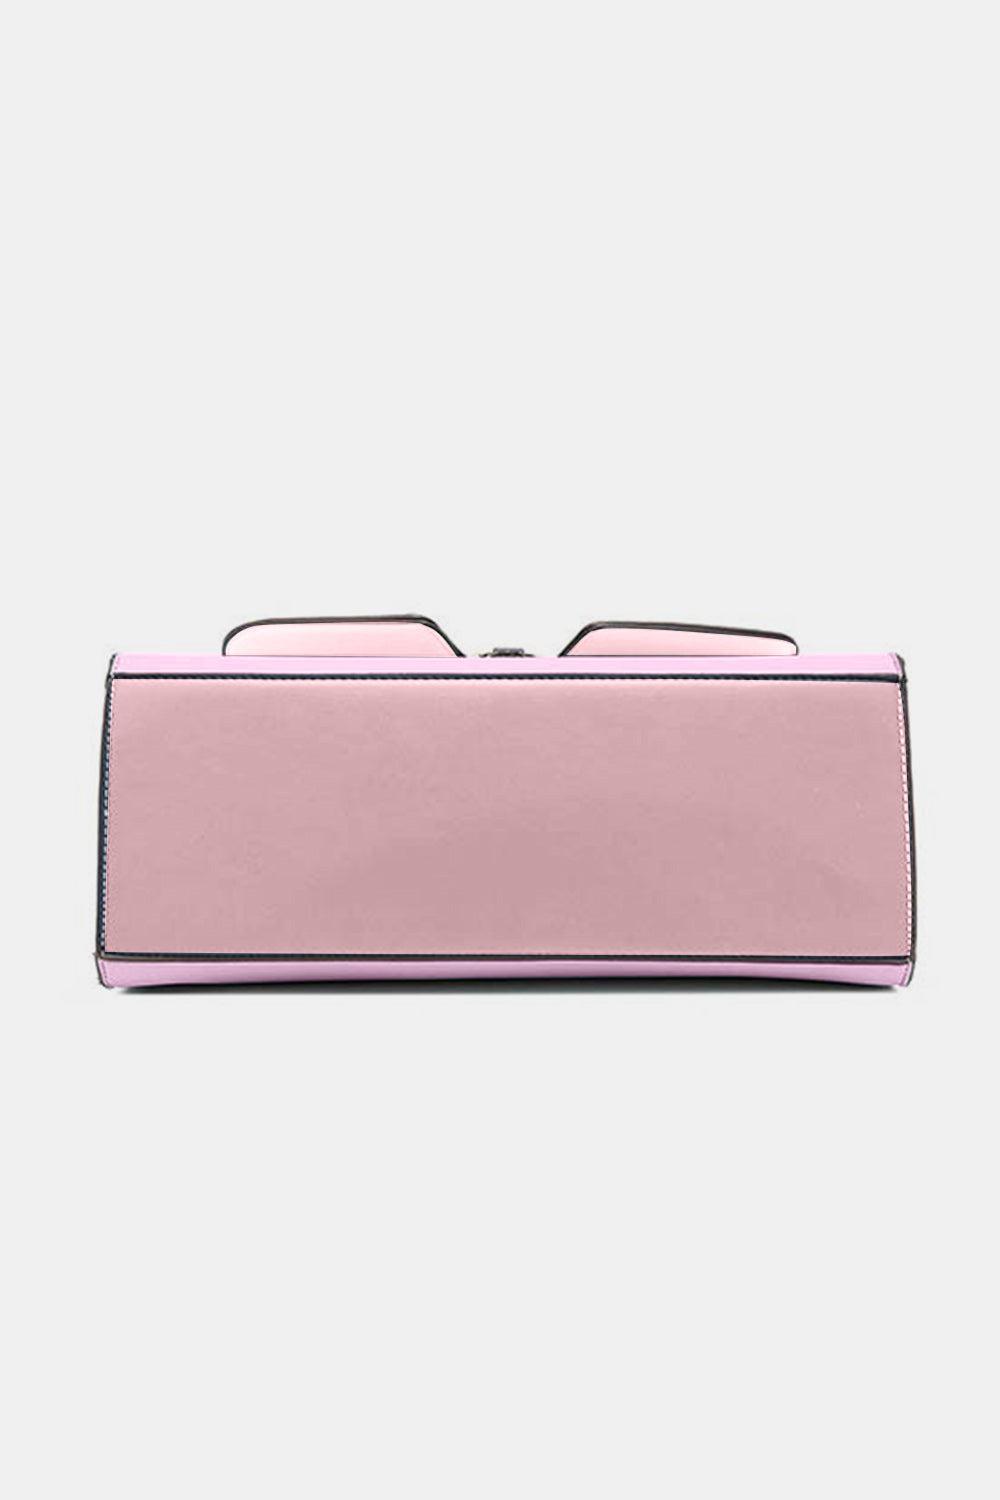 a pink purse with a pair of glasses on top of it